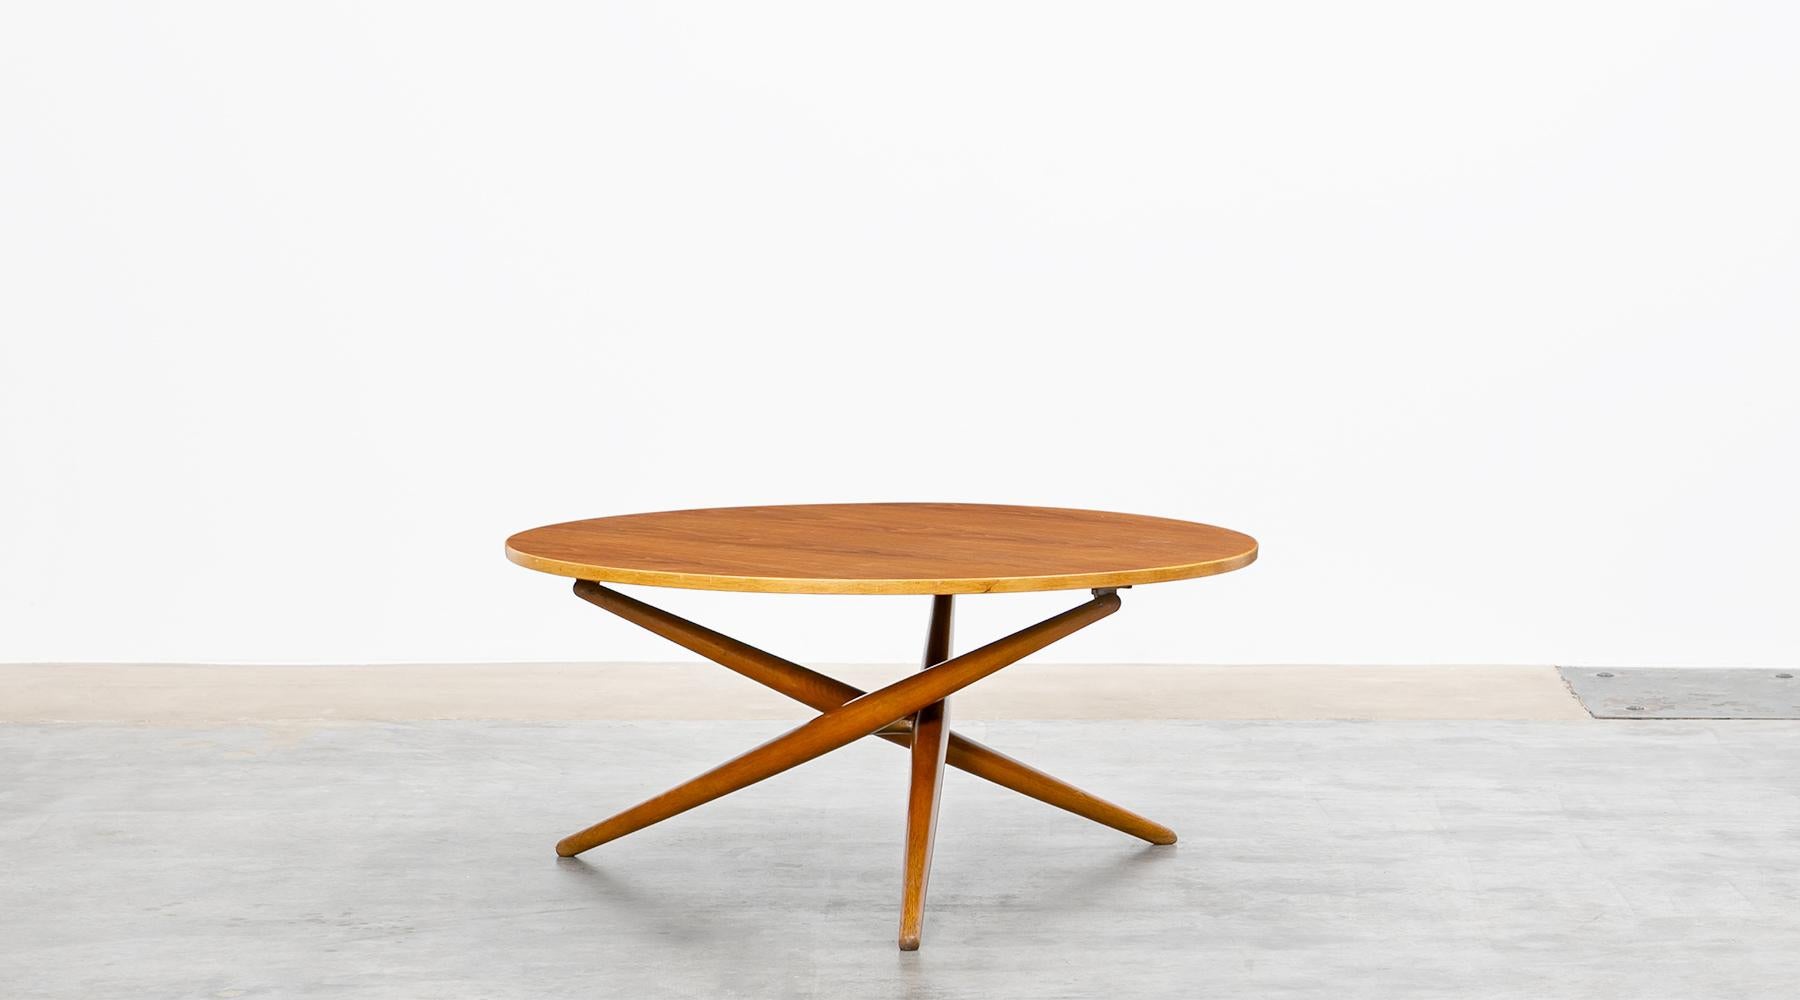 Adjustable side table in wood by Jürg Bally, Switzerland, 1951.

Iconic slim and graceful wooden eat and tea table by Swiss Jürg Bally from 1951. This model strongly reminds of a 1955 side table by US designer T.H. Robsjohn-Gibbings, differed only